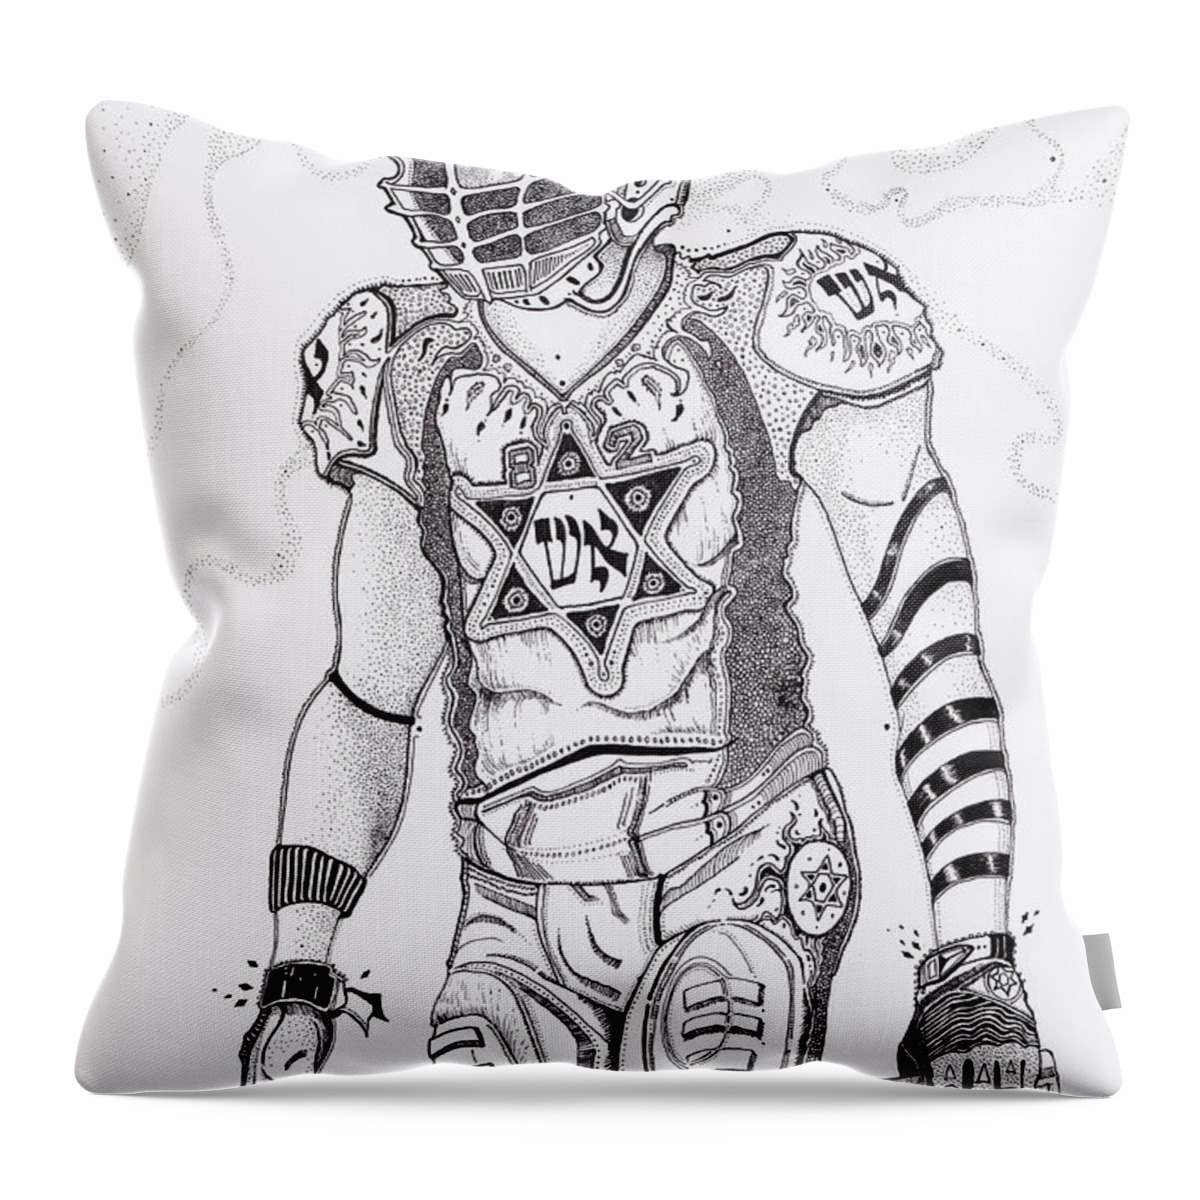 Football Throw Pillow featuring the painting The Football King by Yom Tov Blumenthal